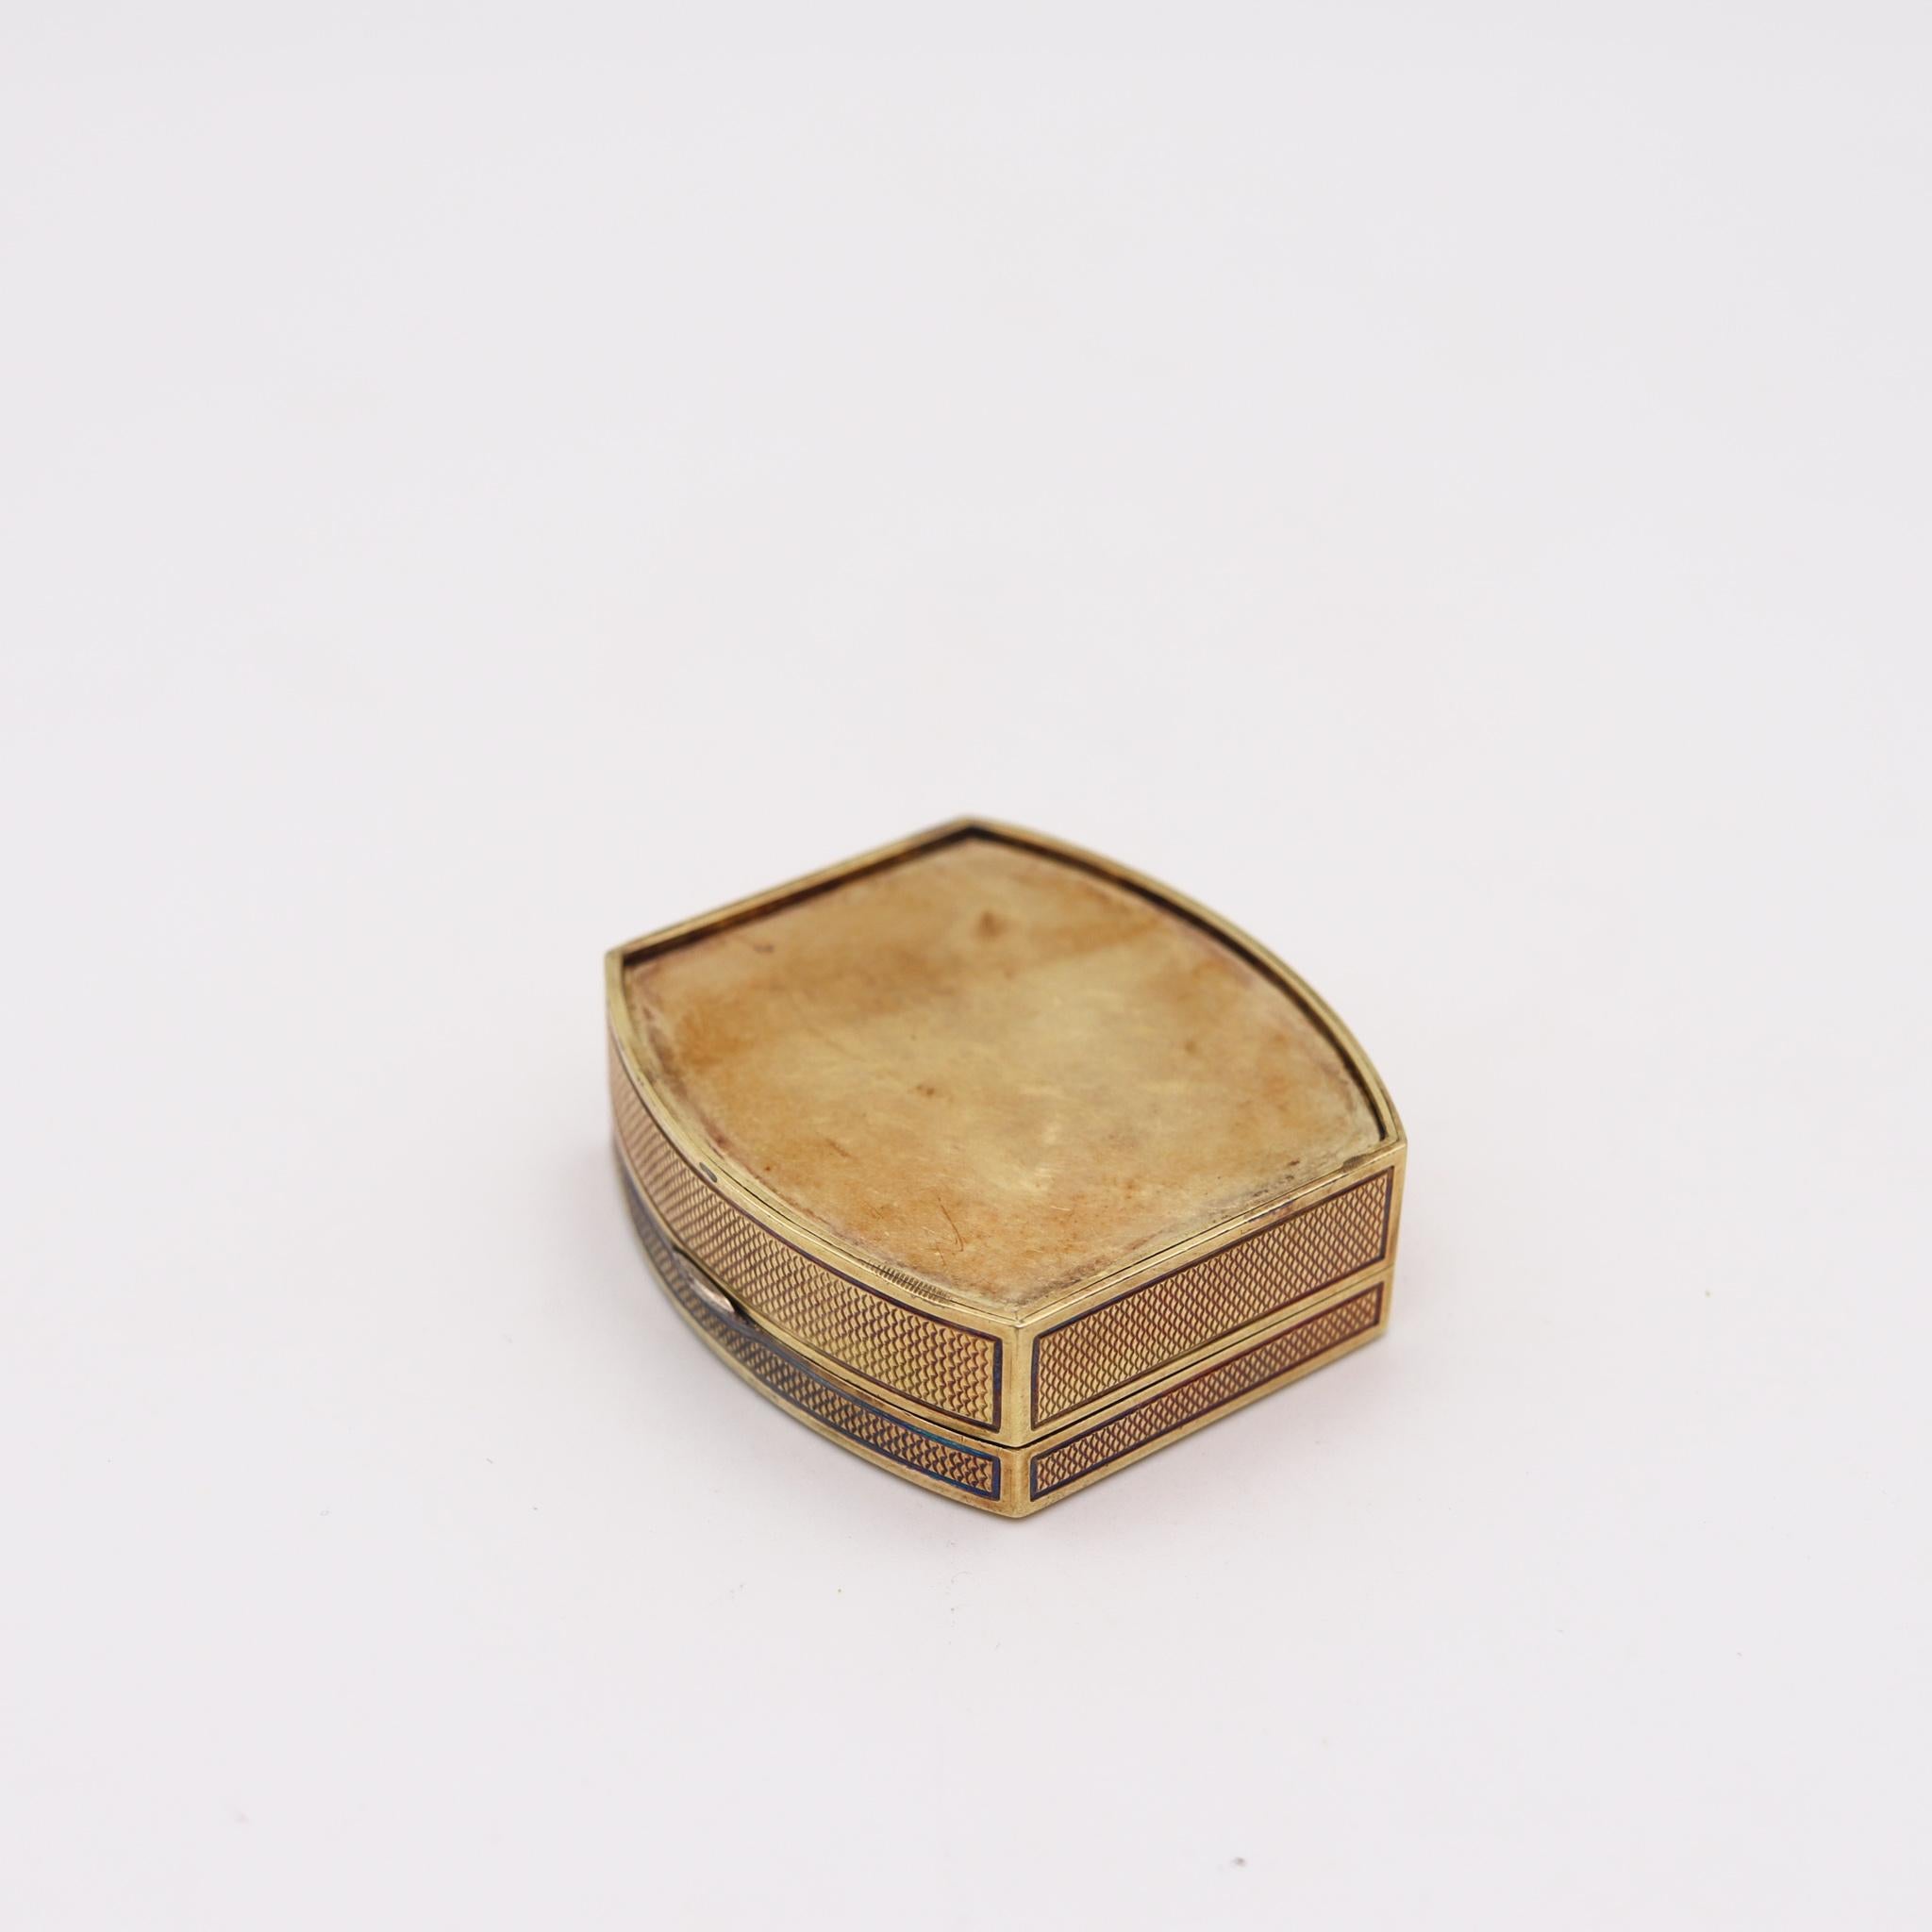 Hand-Crafted Henrik Wigström 1908 Russia Saint Petersburg Enameled Snuff Box in 14kt Gold For Sale